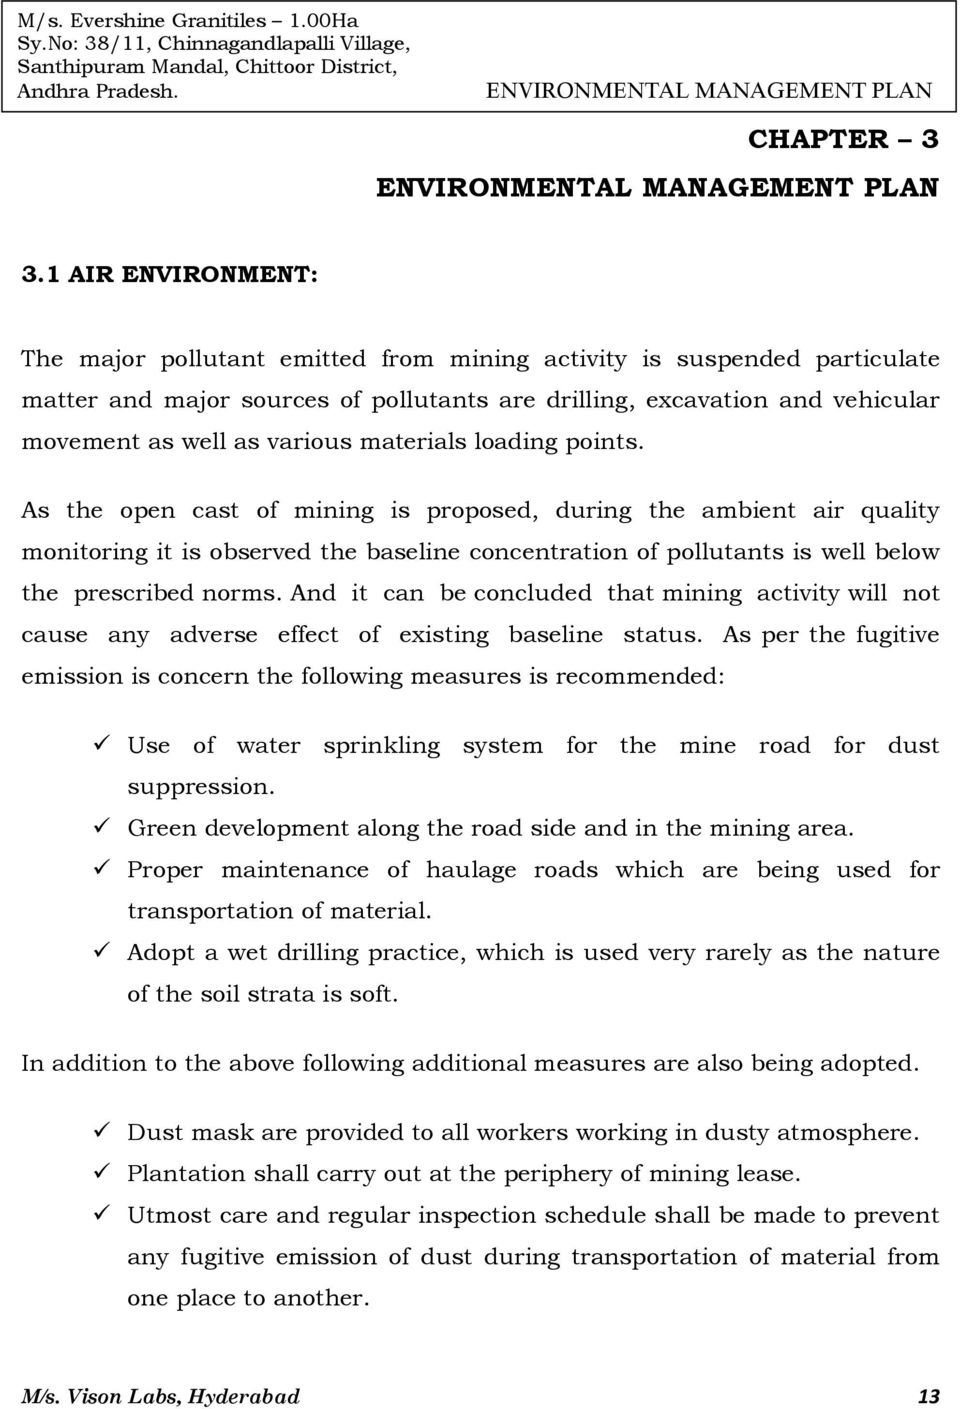 materials loading points. As the open cast of mining is proposed, during the ambient air quality monitoring it is observed the baseline concentration of pollutants is well below the prescribed norms.